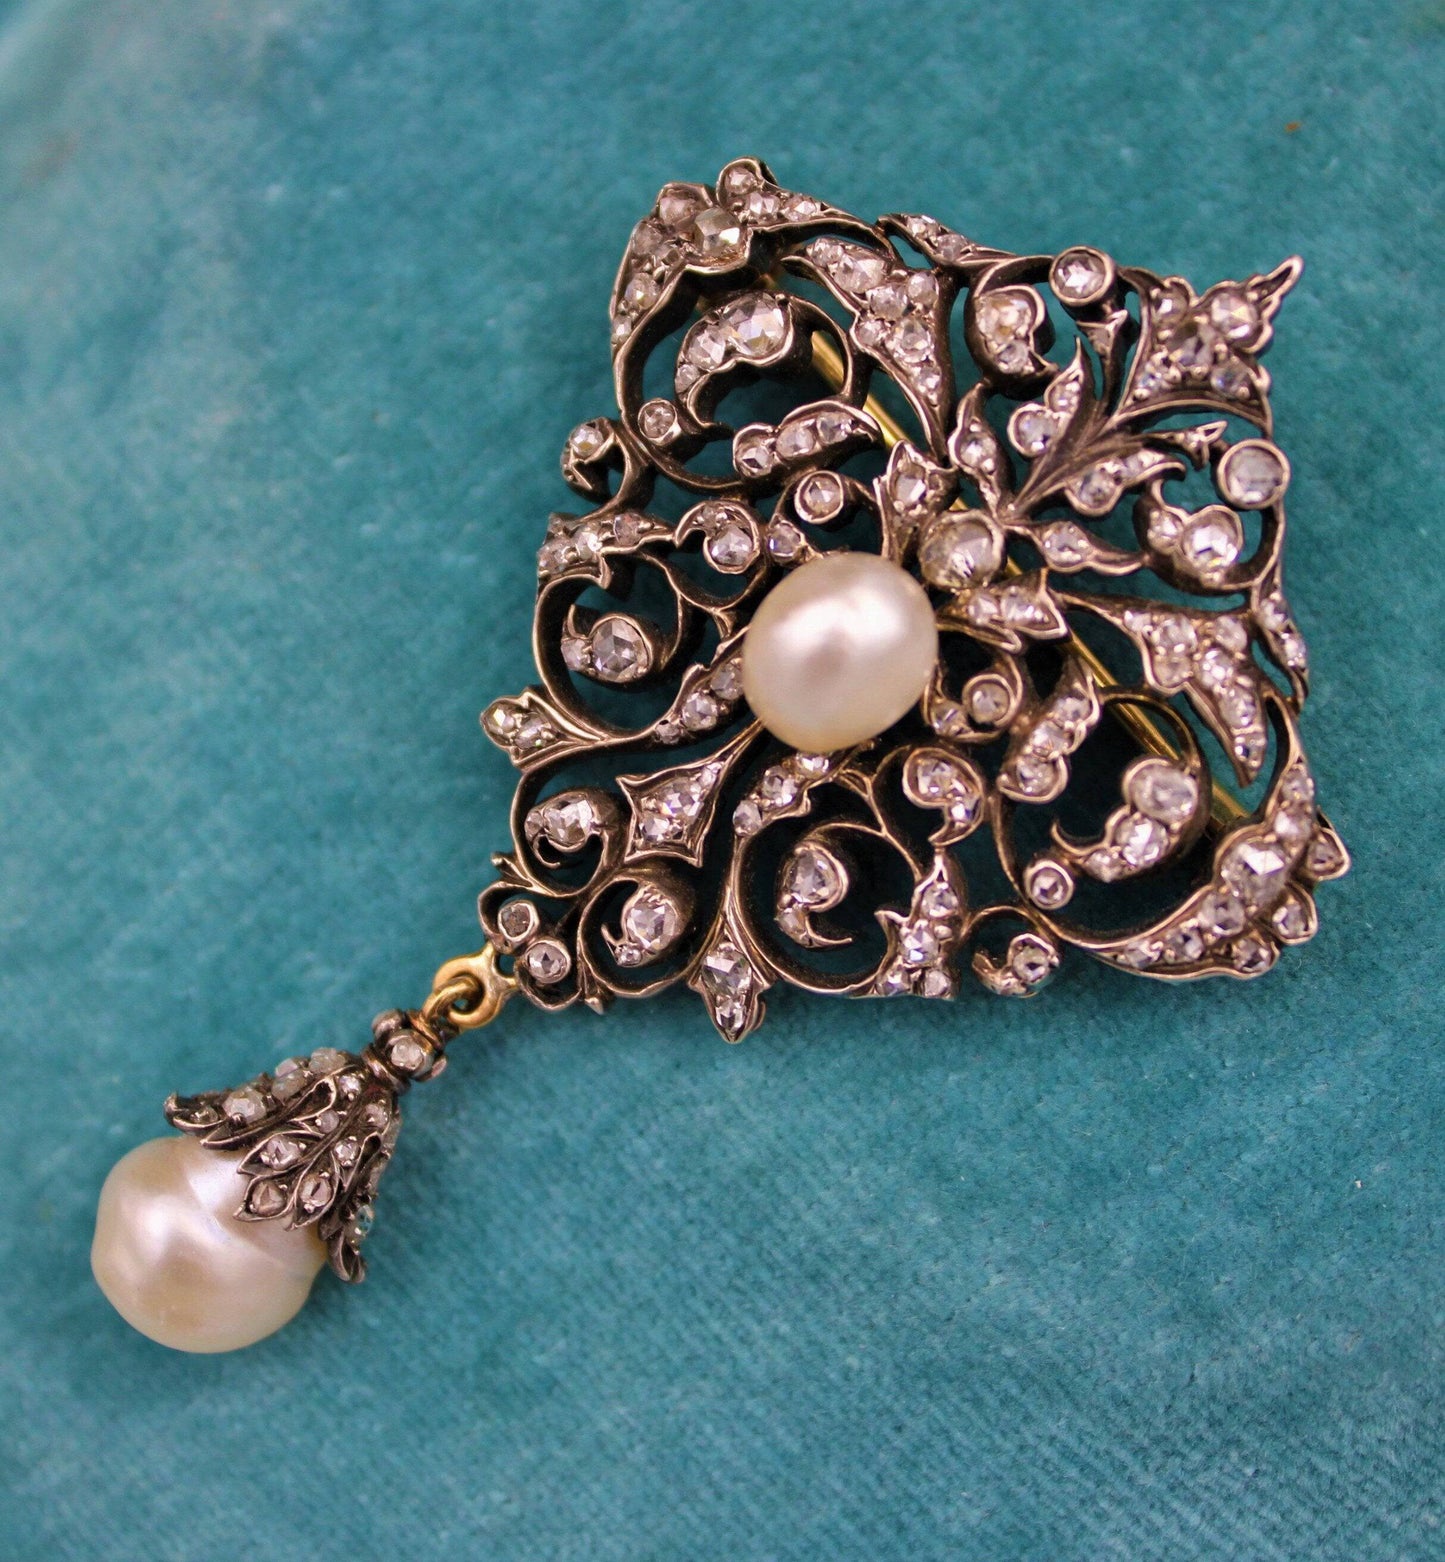 An exceptionally finely worked Natural Pearl & Diamond Brooch/Pendant set in 18ct Yellow Gold & Silver, French, Circa 1870 - Robin Haydock Antiques